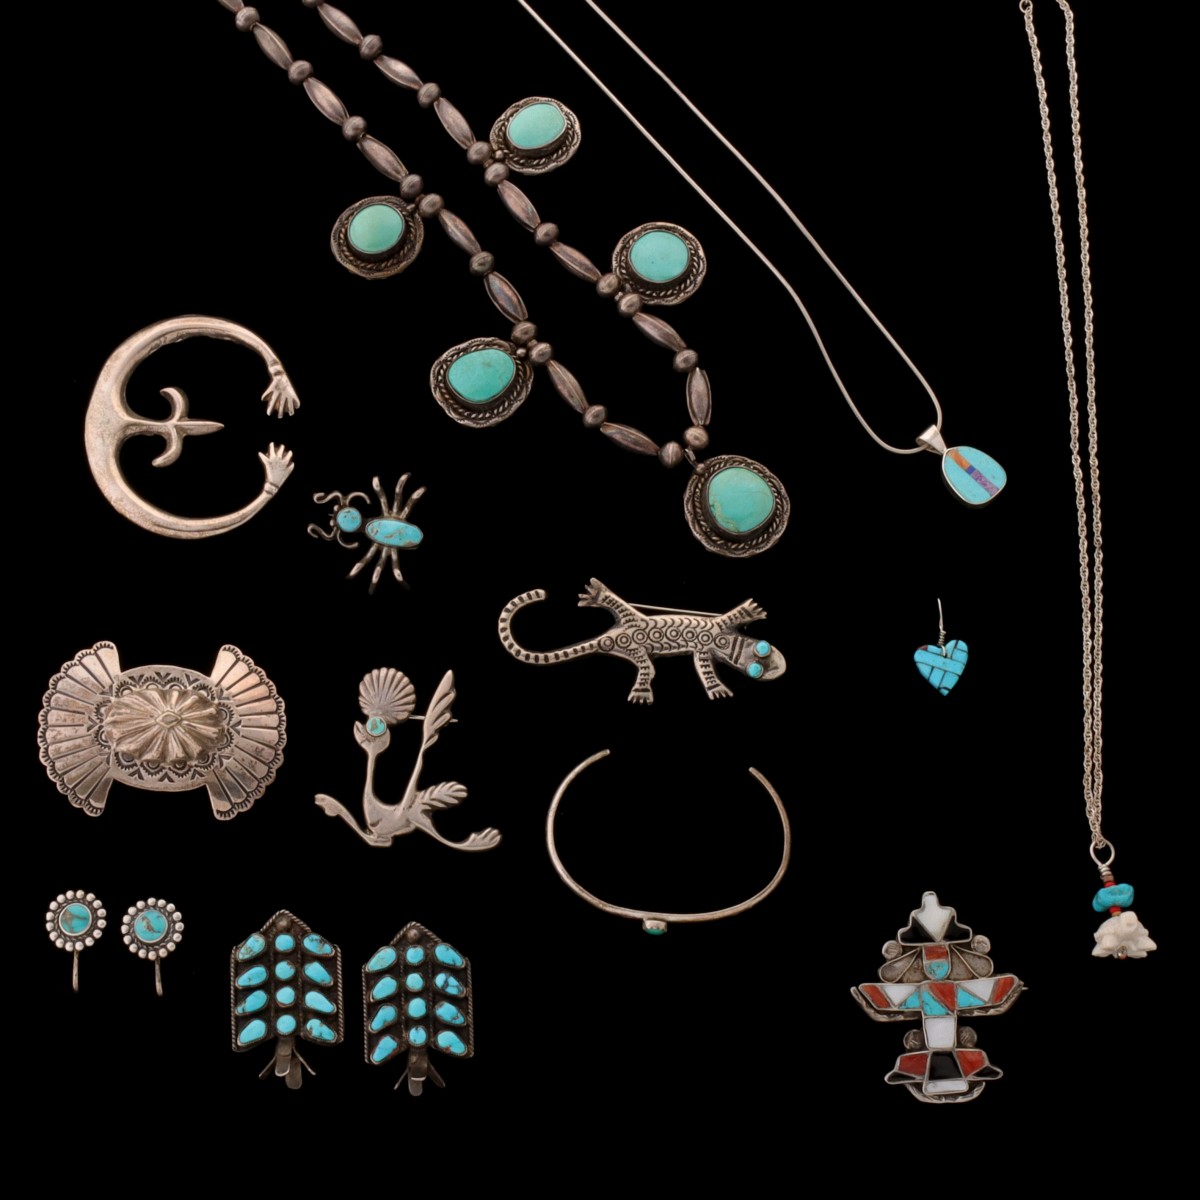 A GROUP OF STERLING JEWELRY WITH TURQUOISE